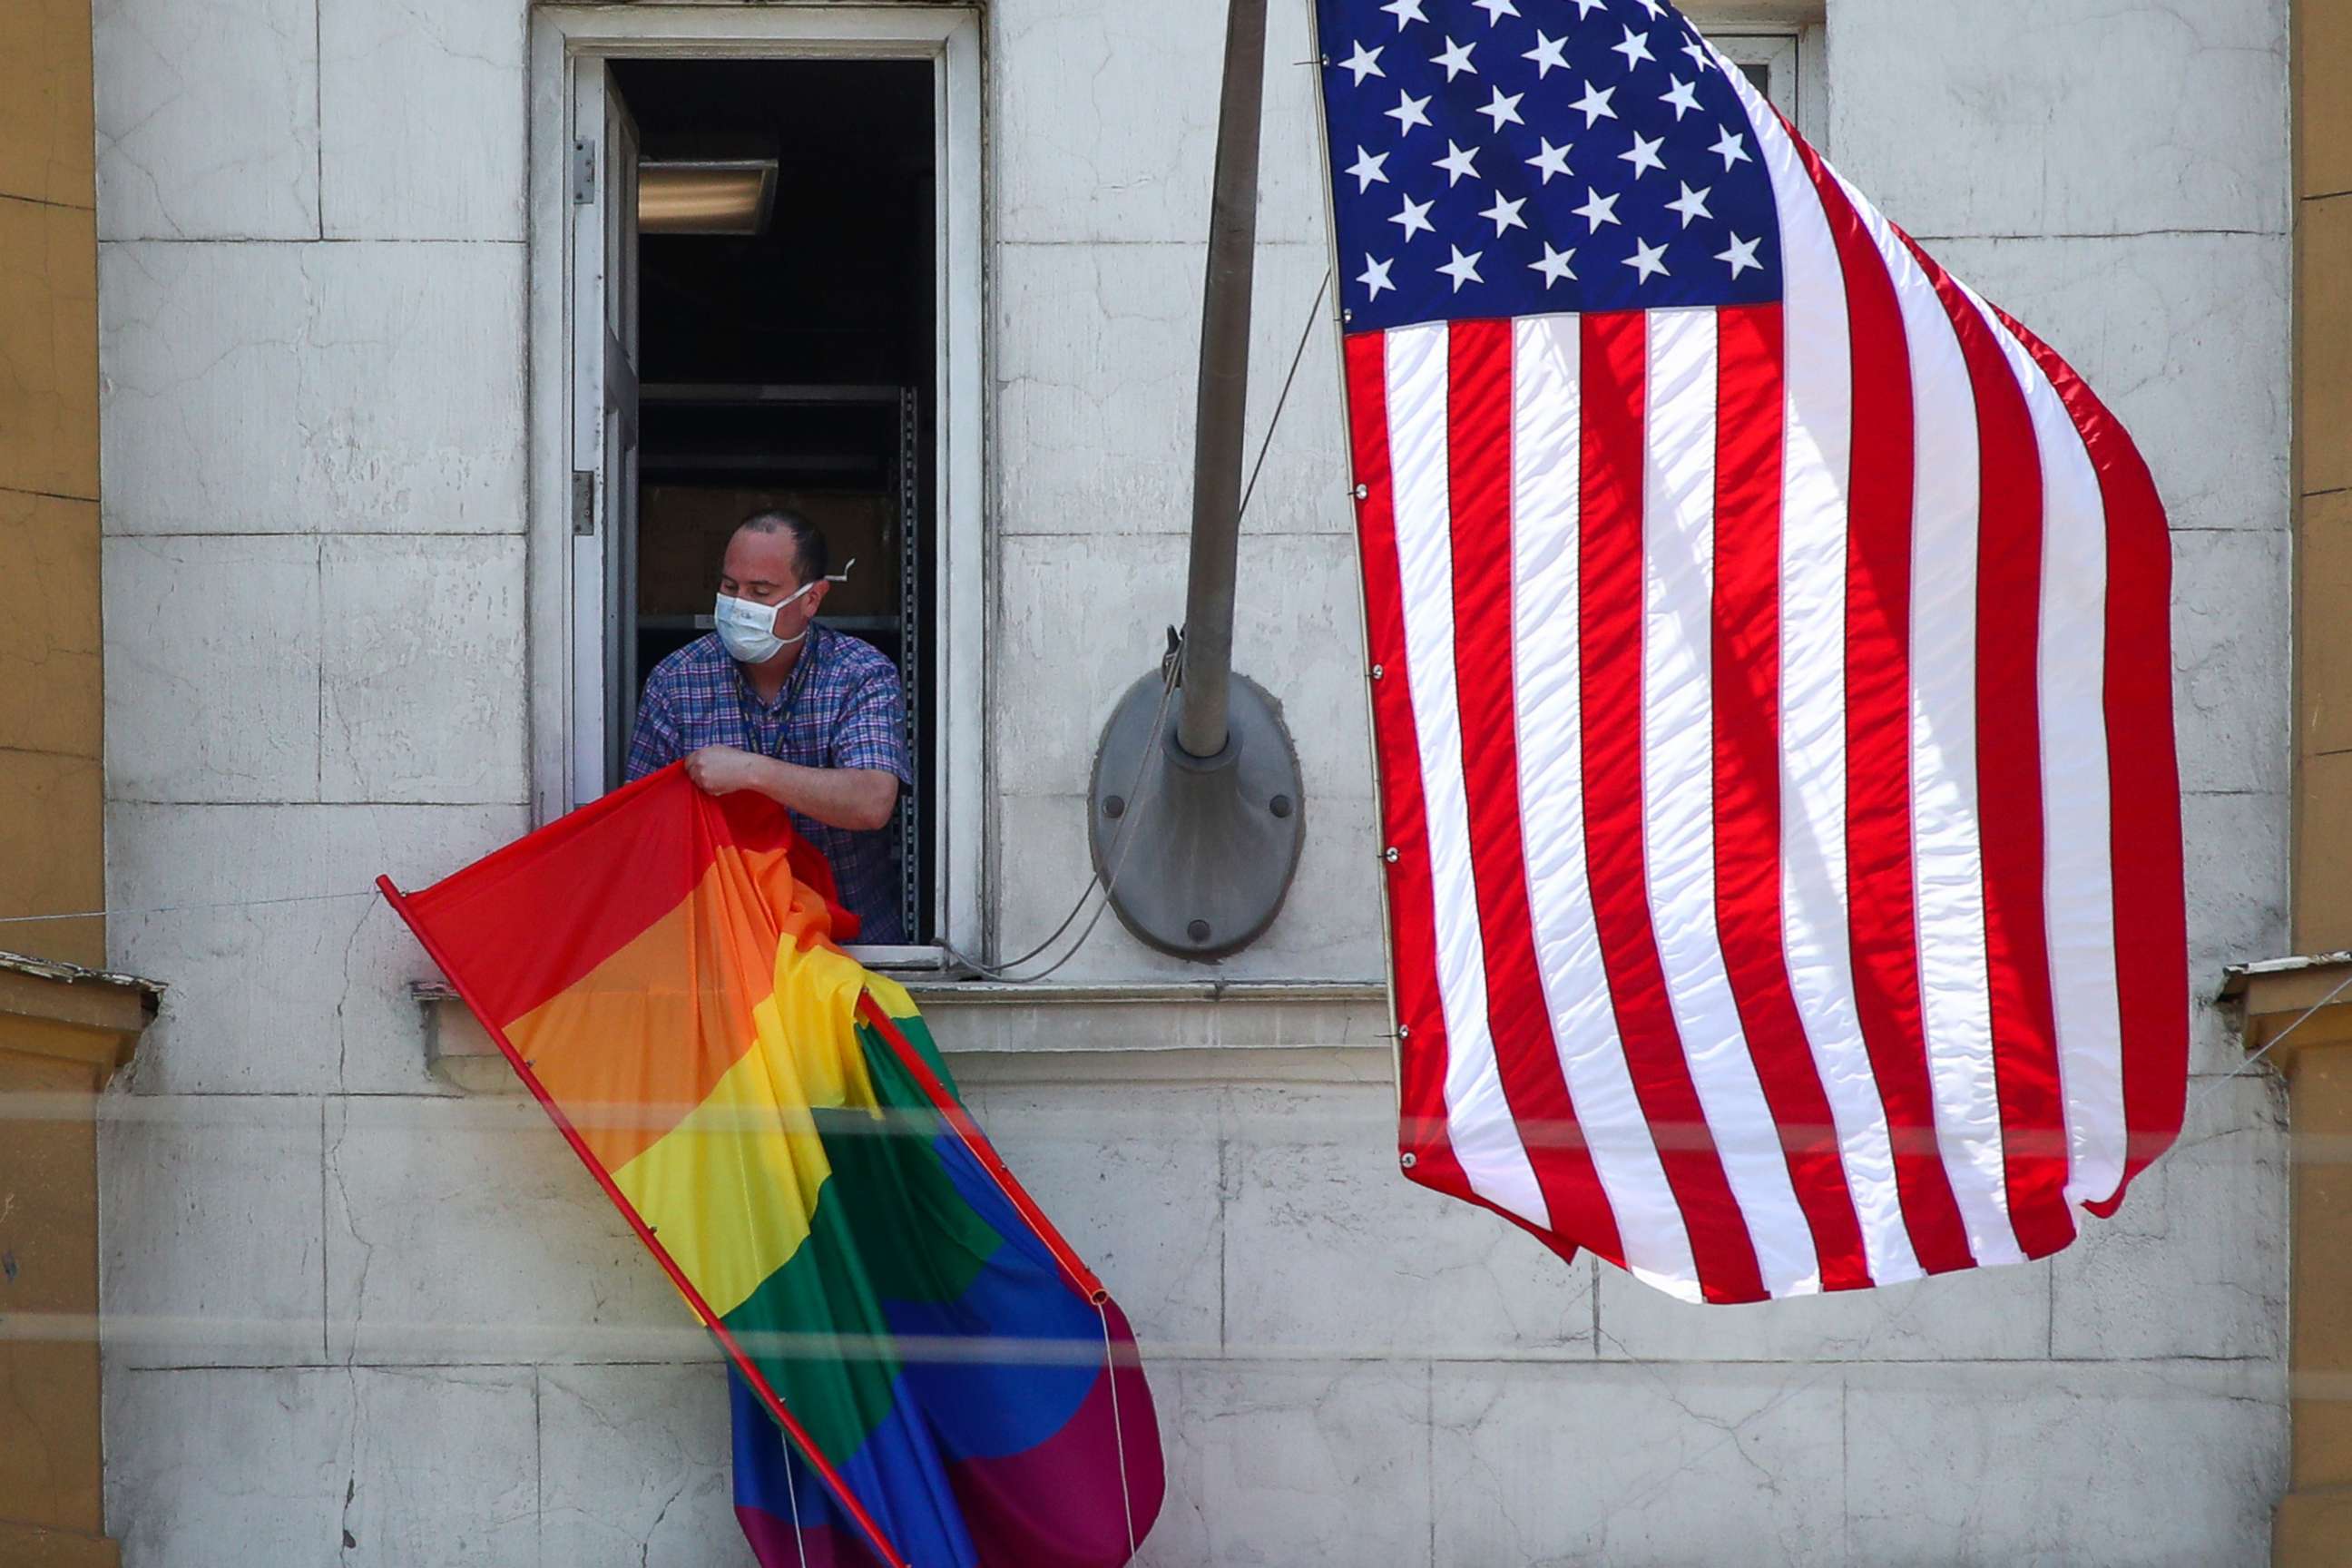 PHOTO: The US national flag and an LGBT pride flag on the front facade of the US Embassy in Moscow, June 25, 2020.